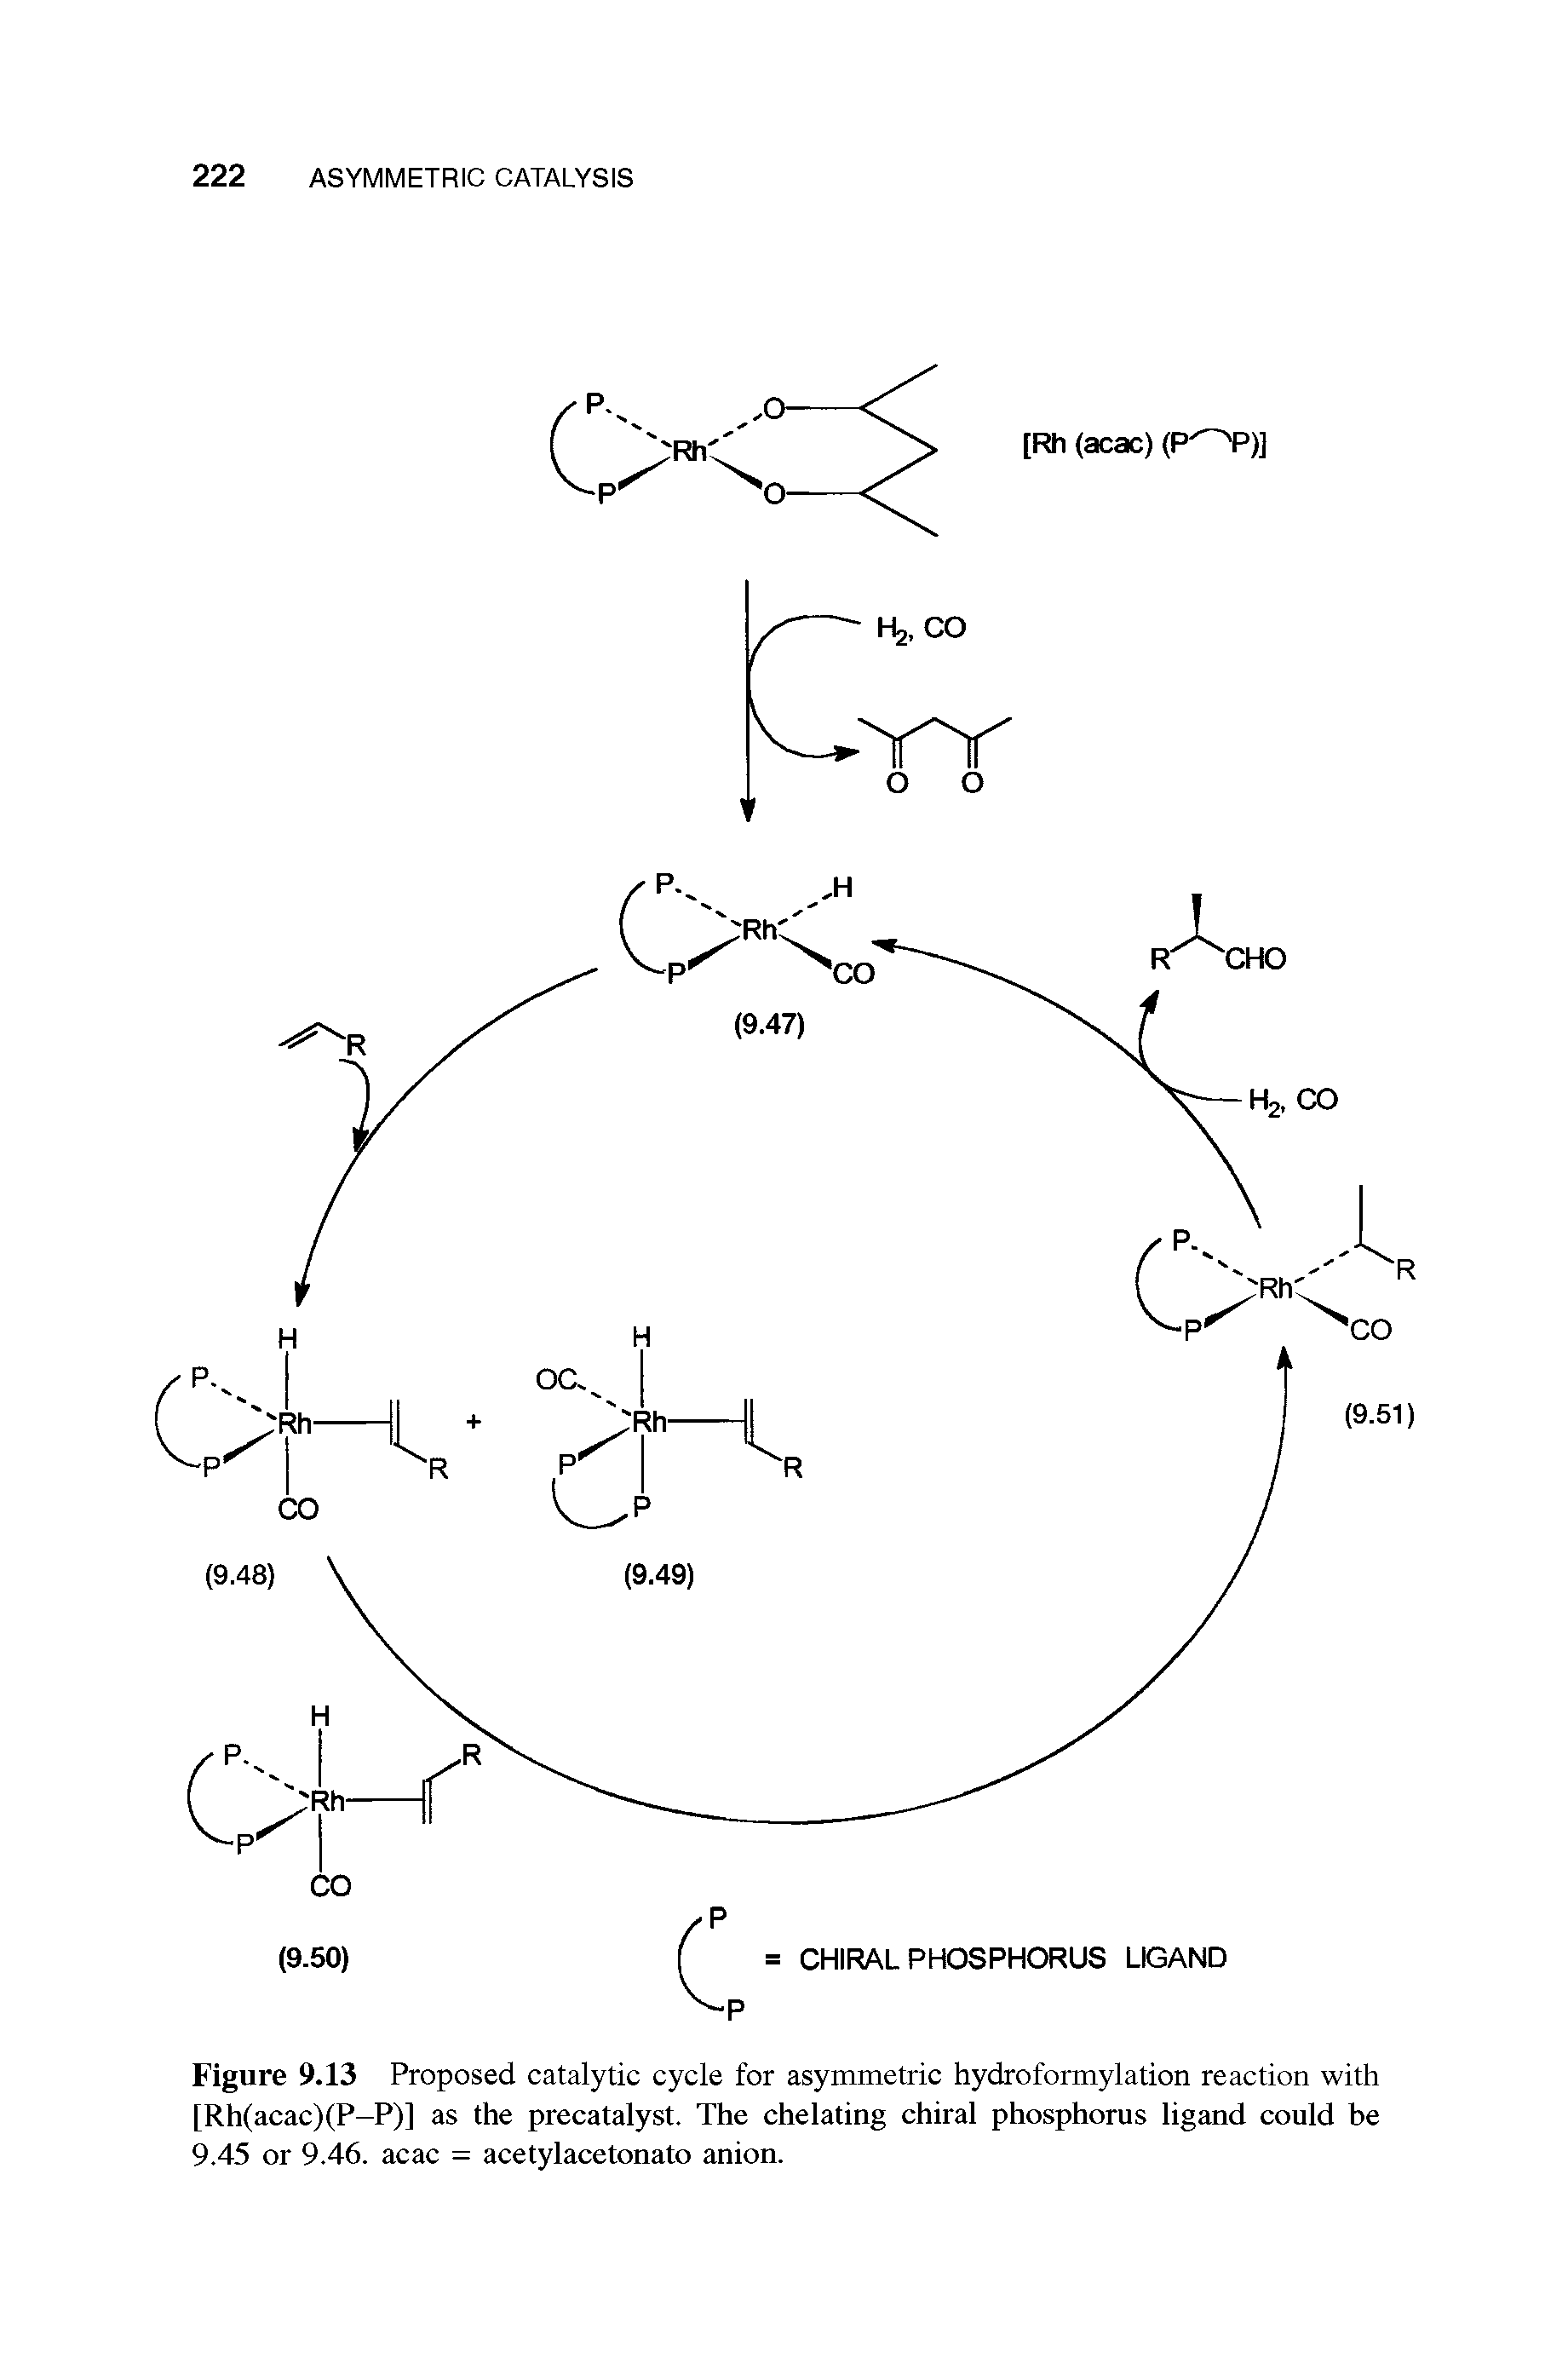 Figure 9.13 Proposed catalytic cycle for asymmetric hydroformylation reaction with [Rh(acac)(P-P)] as the precatalyst. The chelating chiral phosphorus ligand could be 9.45 or 9.46. acac = acetylacetonato anion.